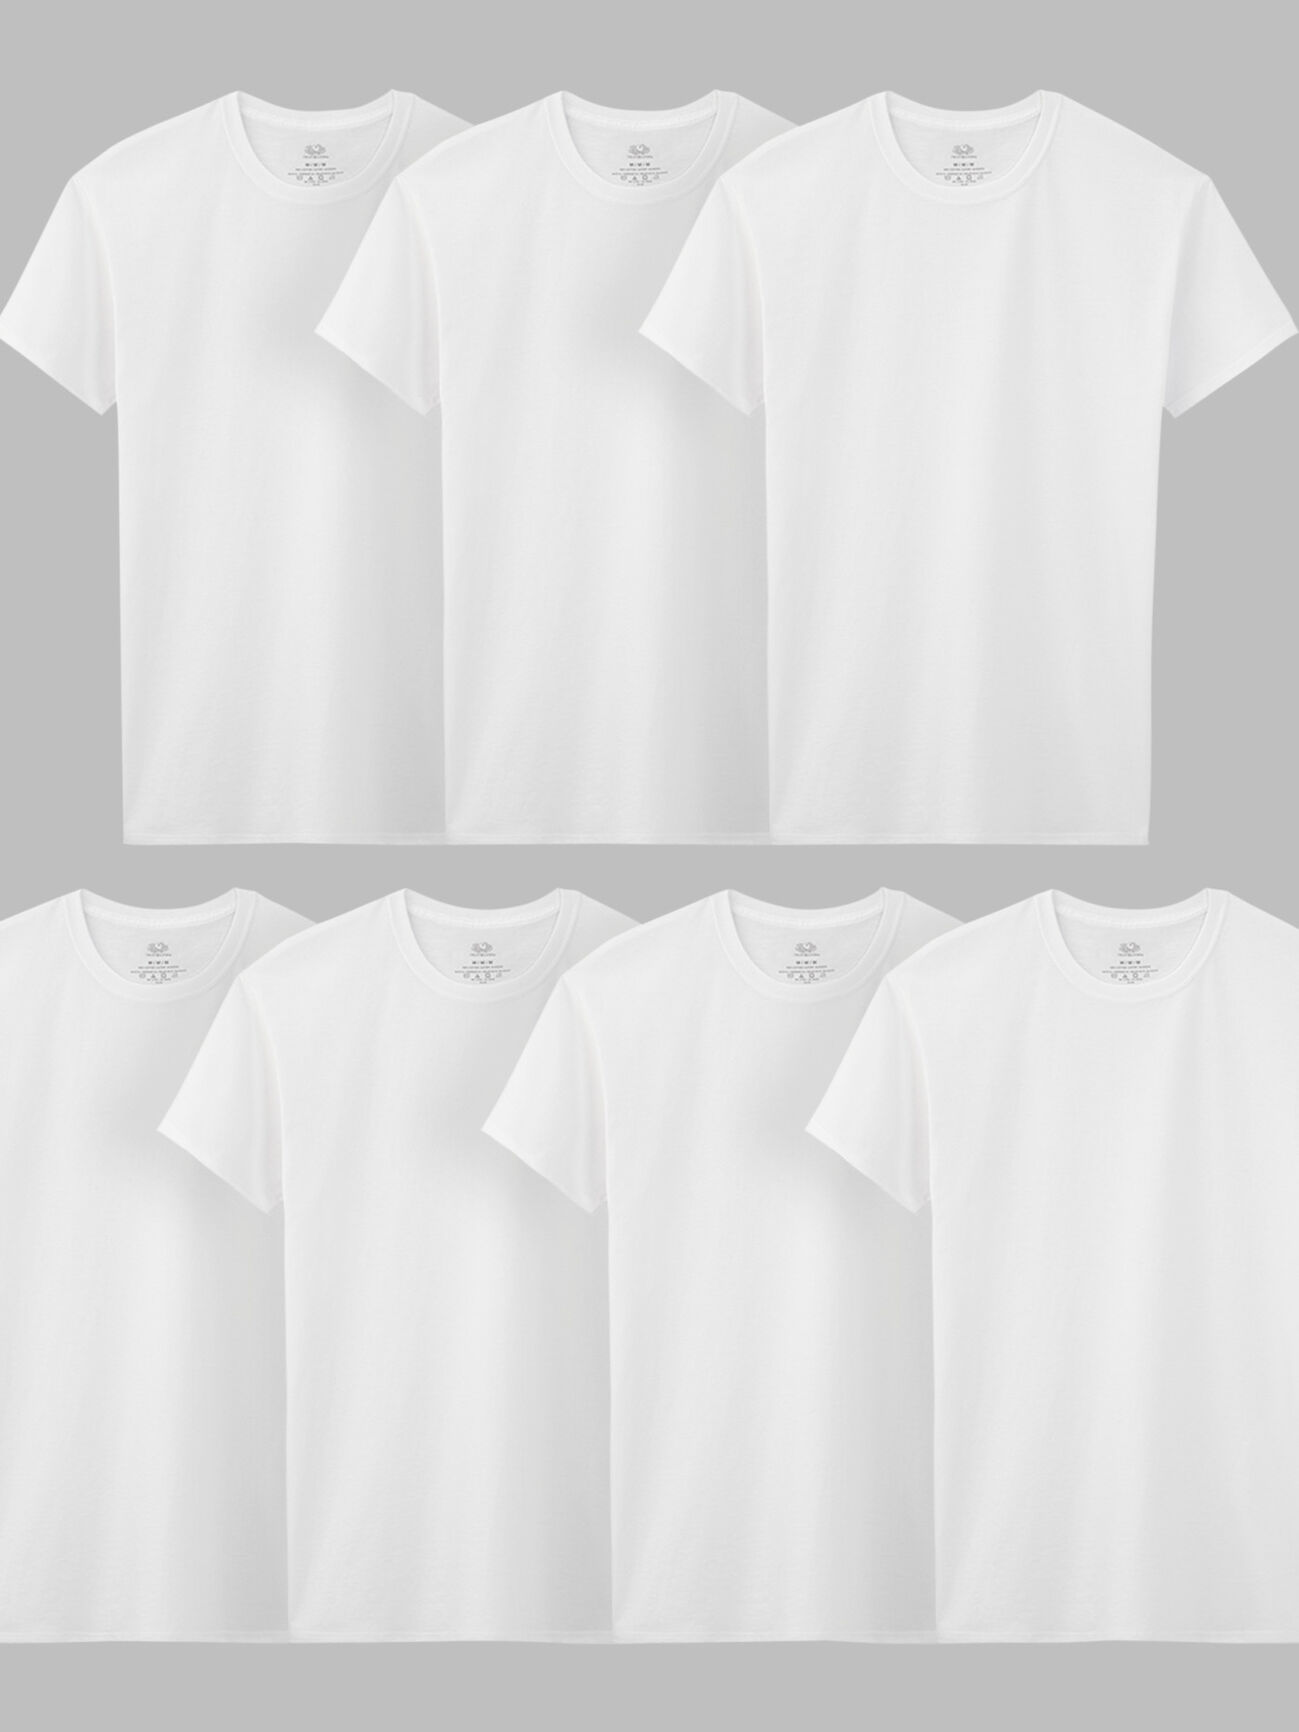 5 PACK Fruit of the Loom Mens Tee Shirt Plain 100% Cotton Round Neck  T-Shirt TOP